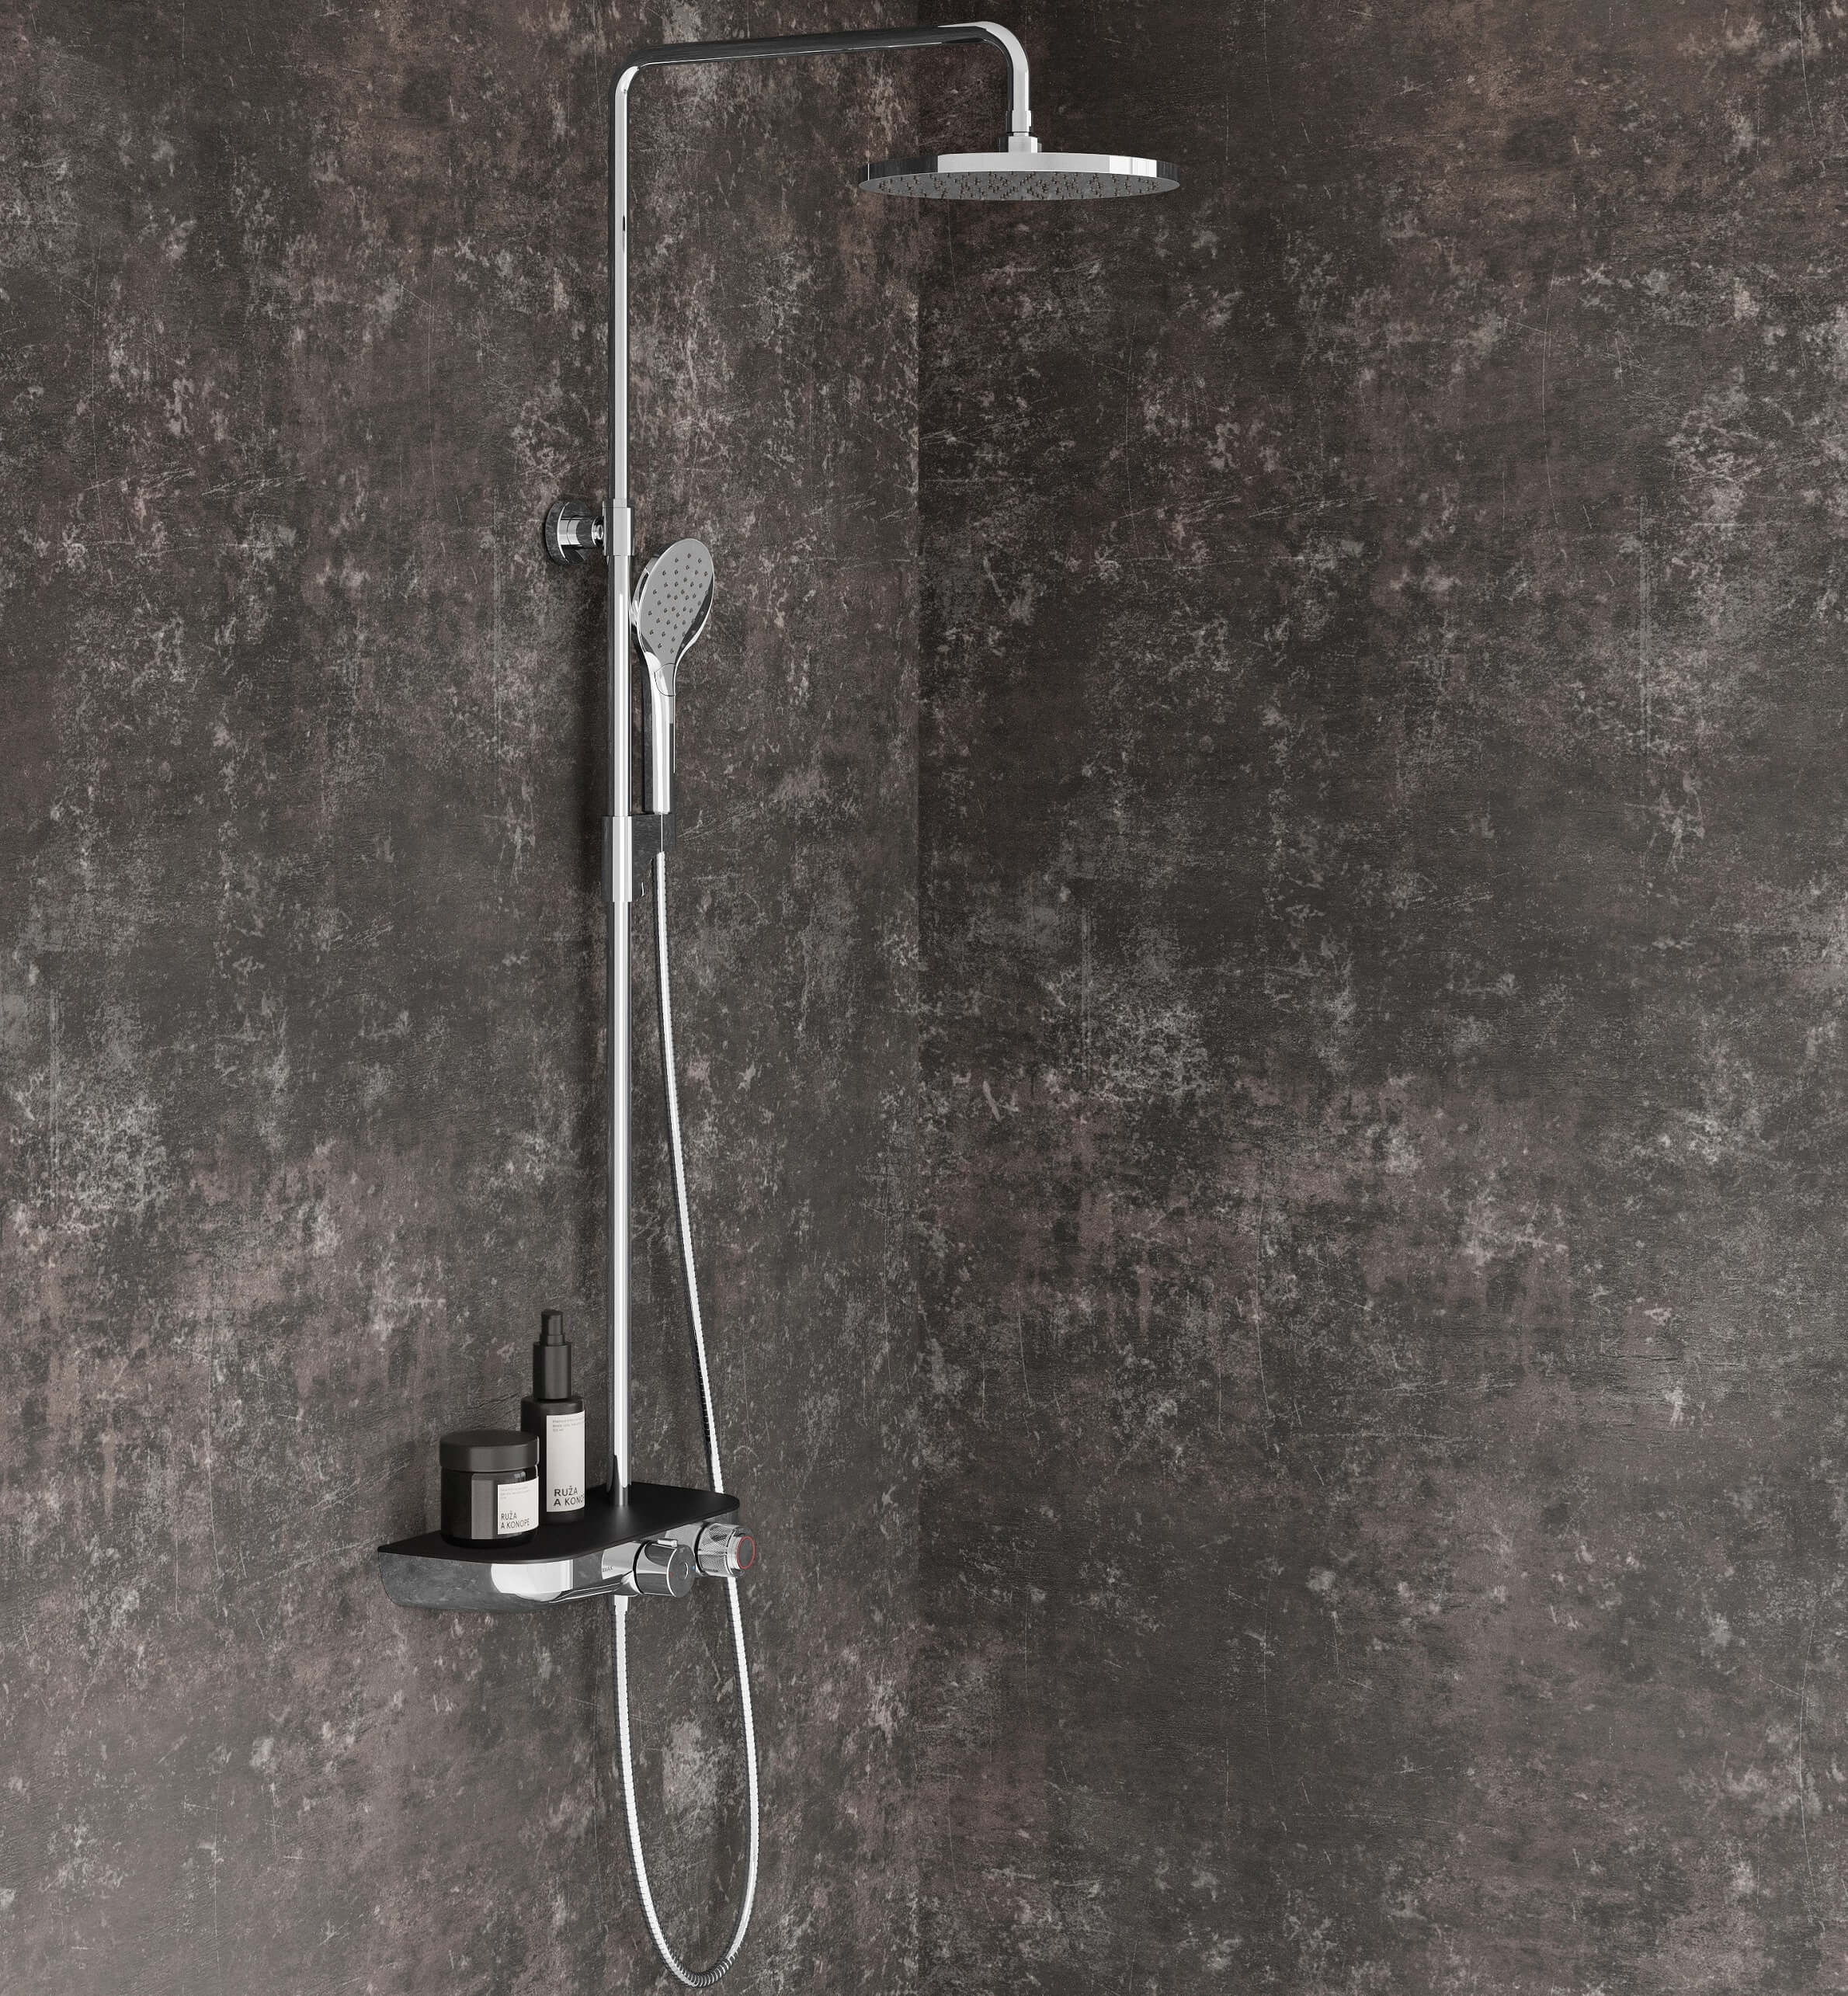 Dual shower systems